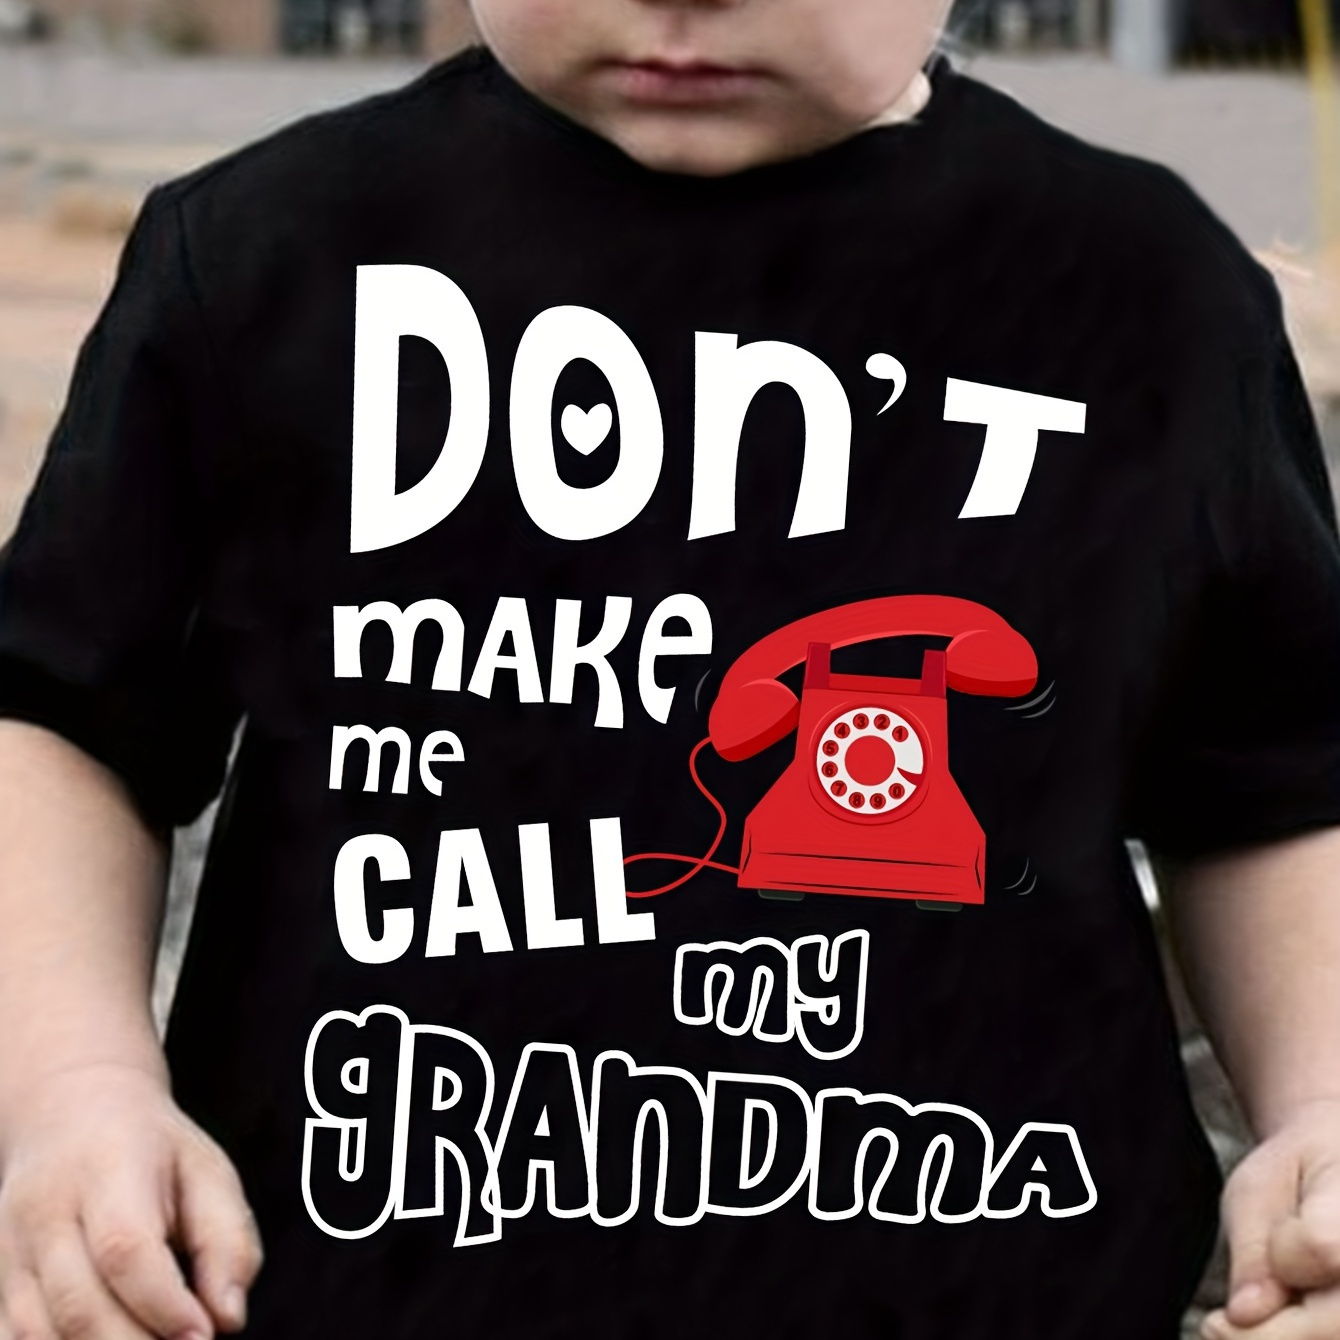 

Don't Make Me Call My Grandma & Cartoon Telephone Graphic Print Tee, Boys' Casual & Trendy Crew Neck Short Sleeve T-shirt For Spring & Summer, Boys' Clothes For Everyday Life